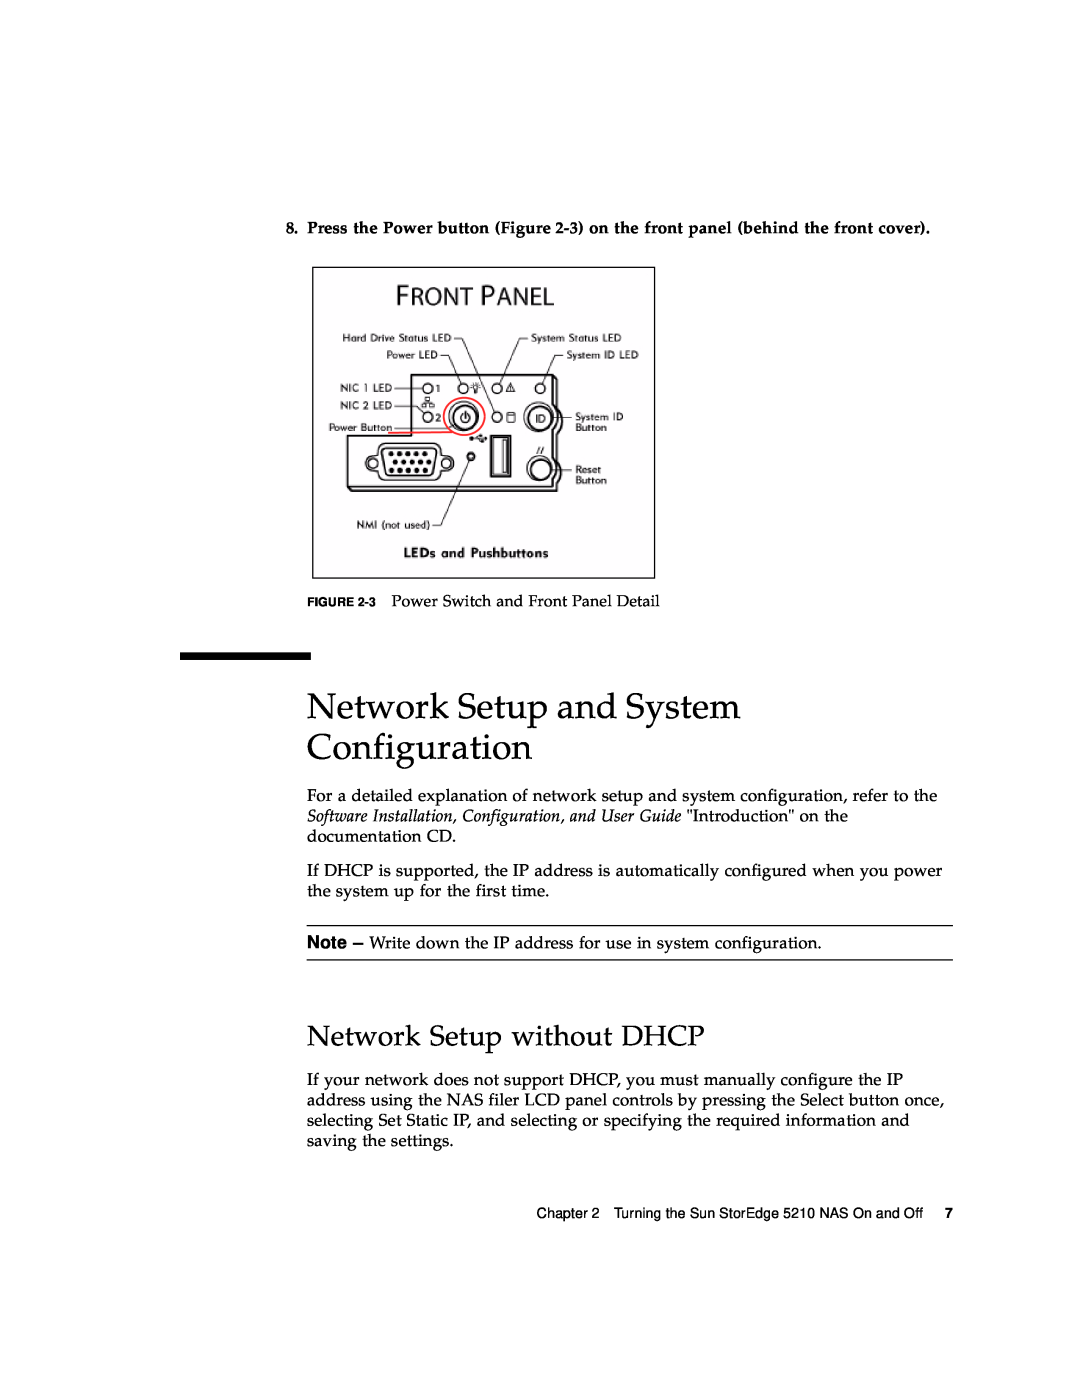 Sun Microsystems 5210 NAS manual Network Setup and System Configuration, Network Setup without DHCP 